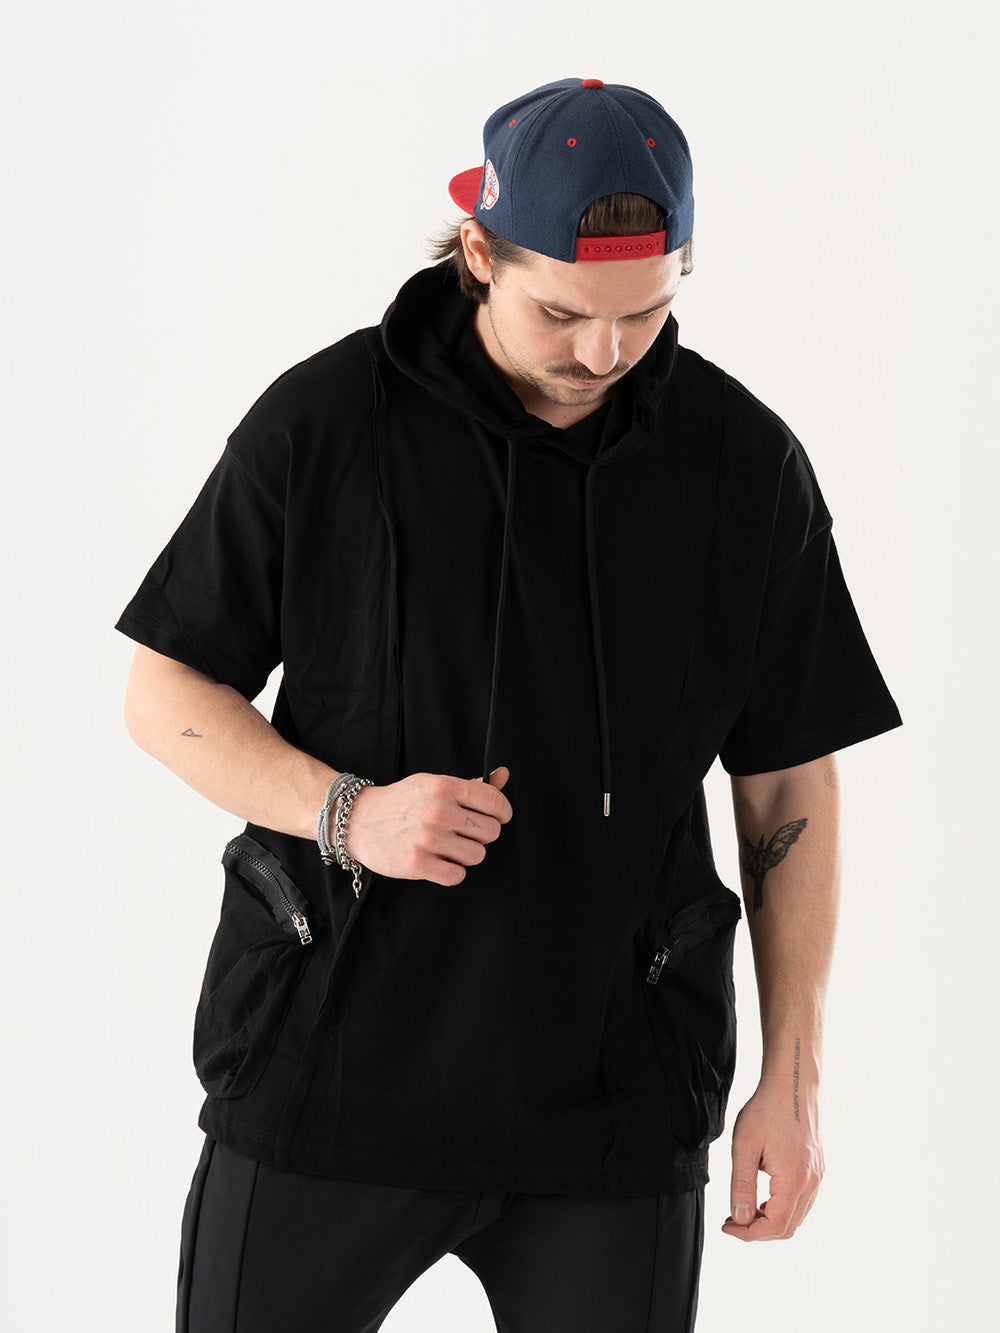 A stylish man wearing the BLACKFURY HOODIE, a black color staple with convenient pockets.